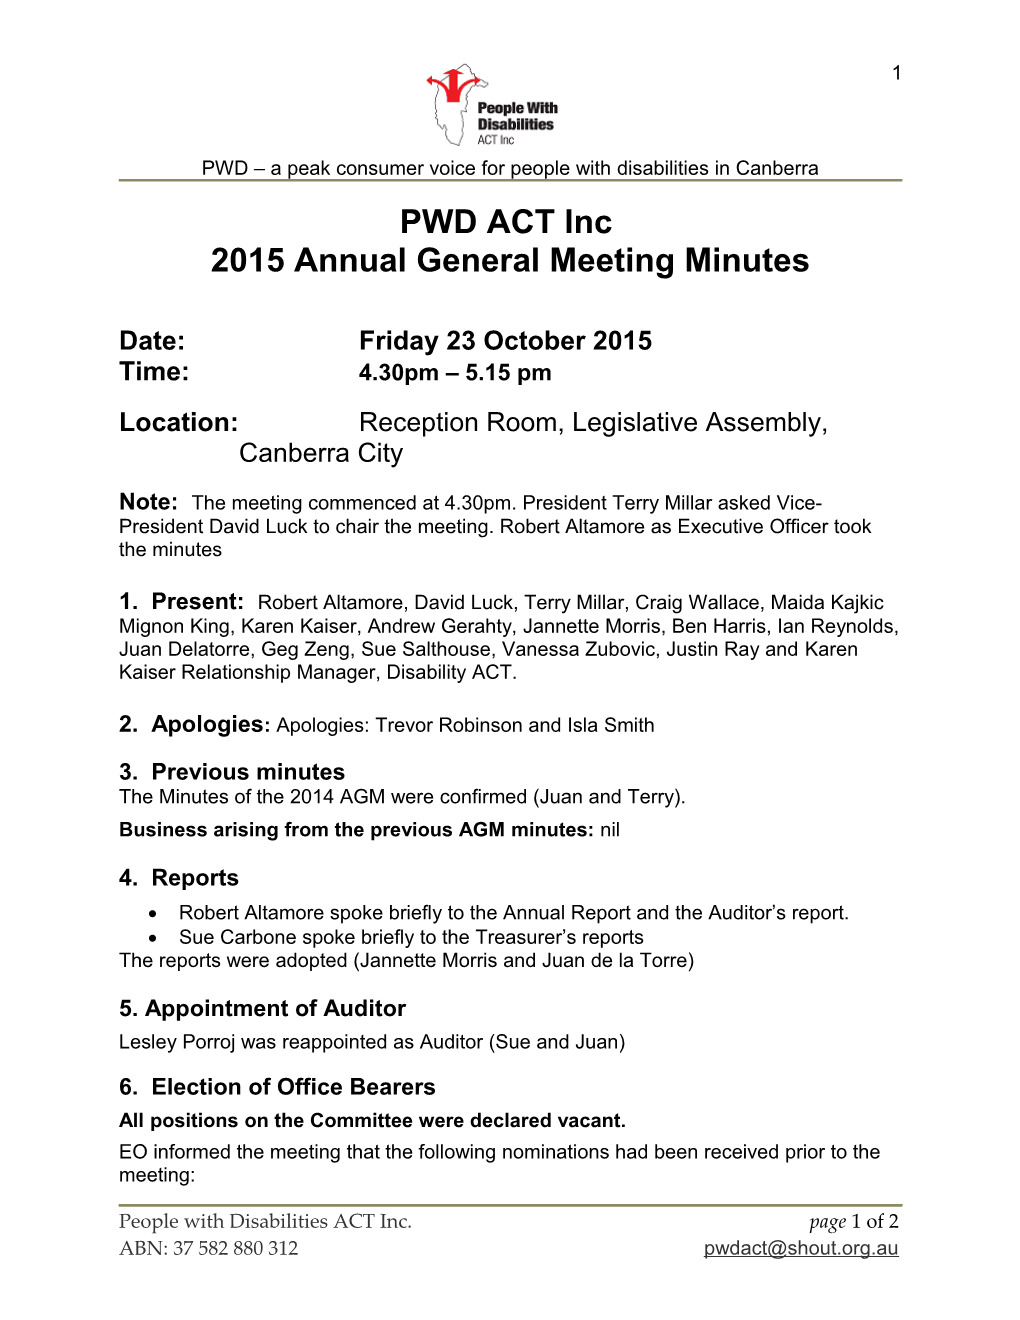 PWD ACT Inc Annual General Meeting